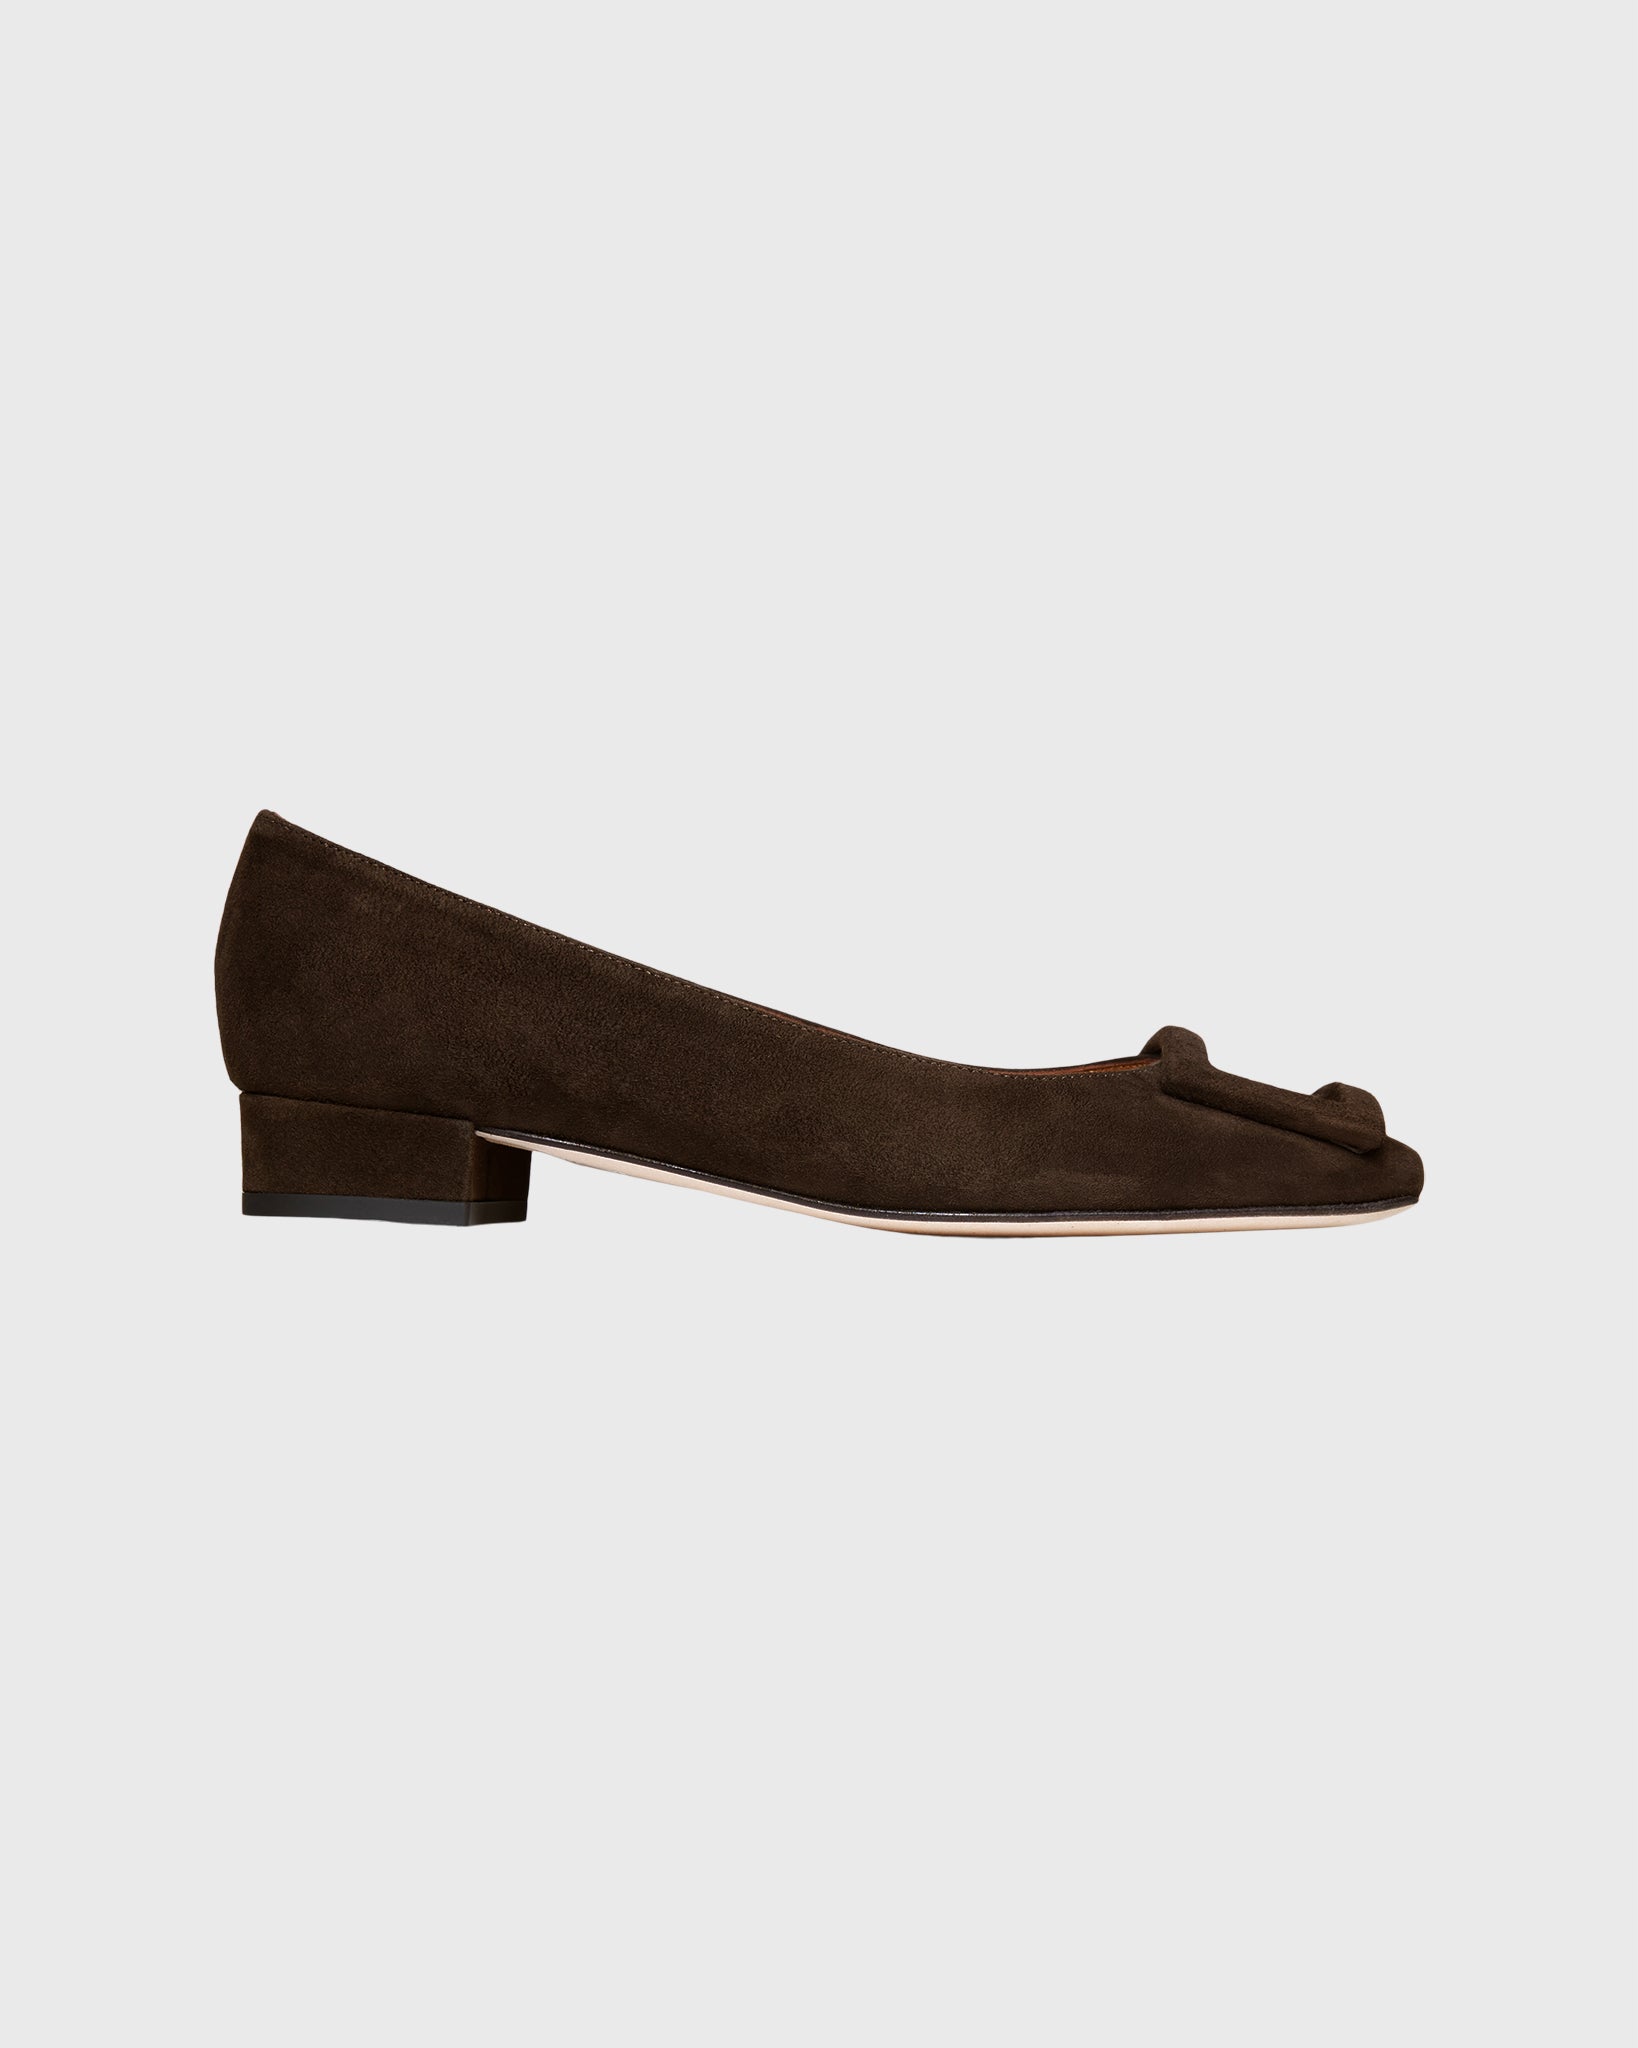 Buckle Shoe in Chocolate Suede